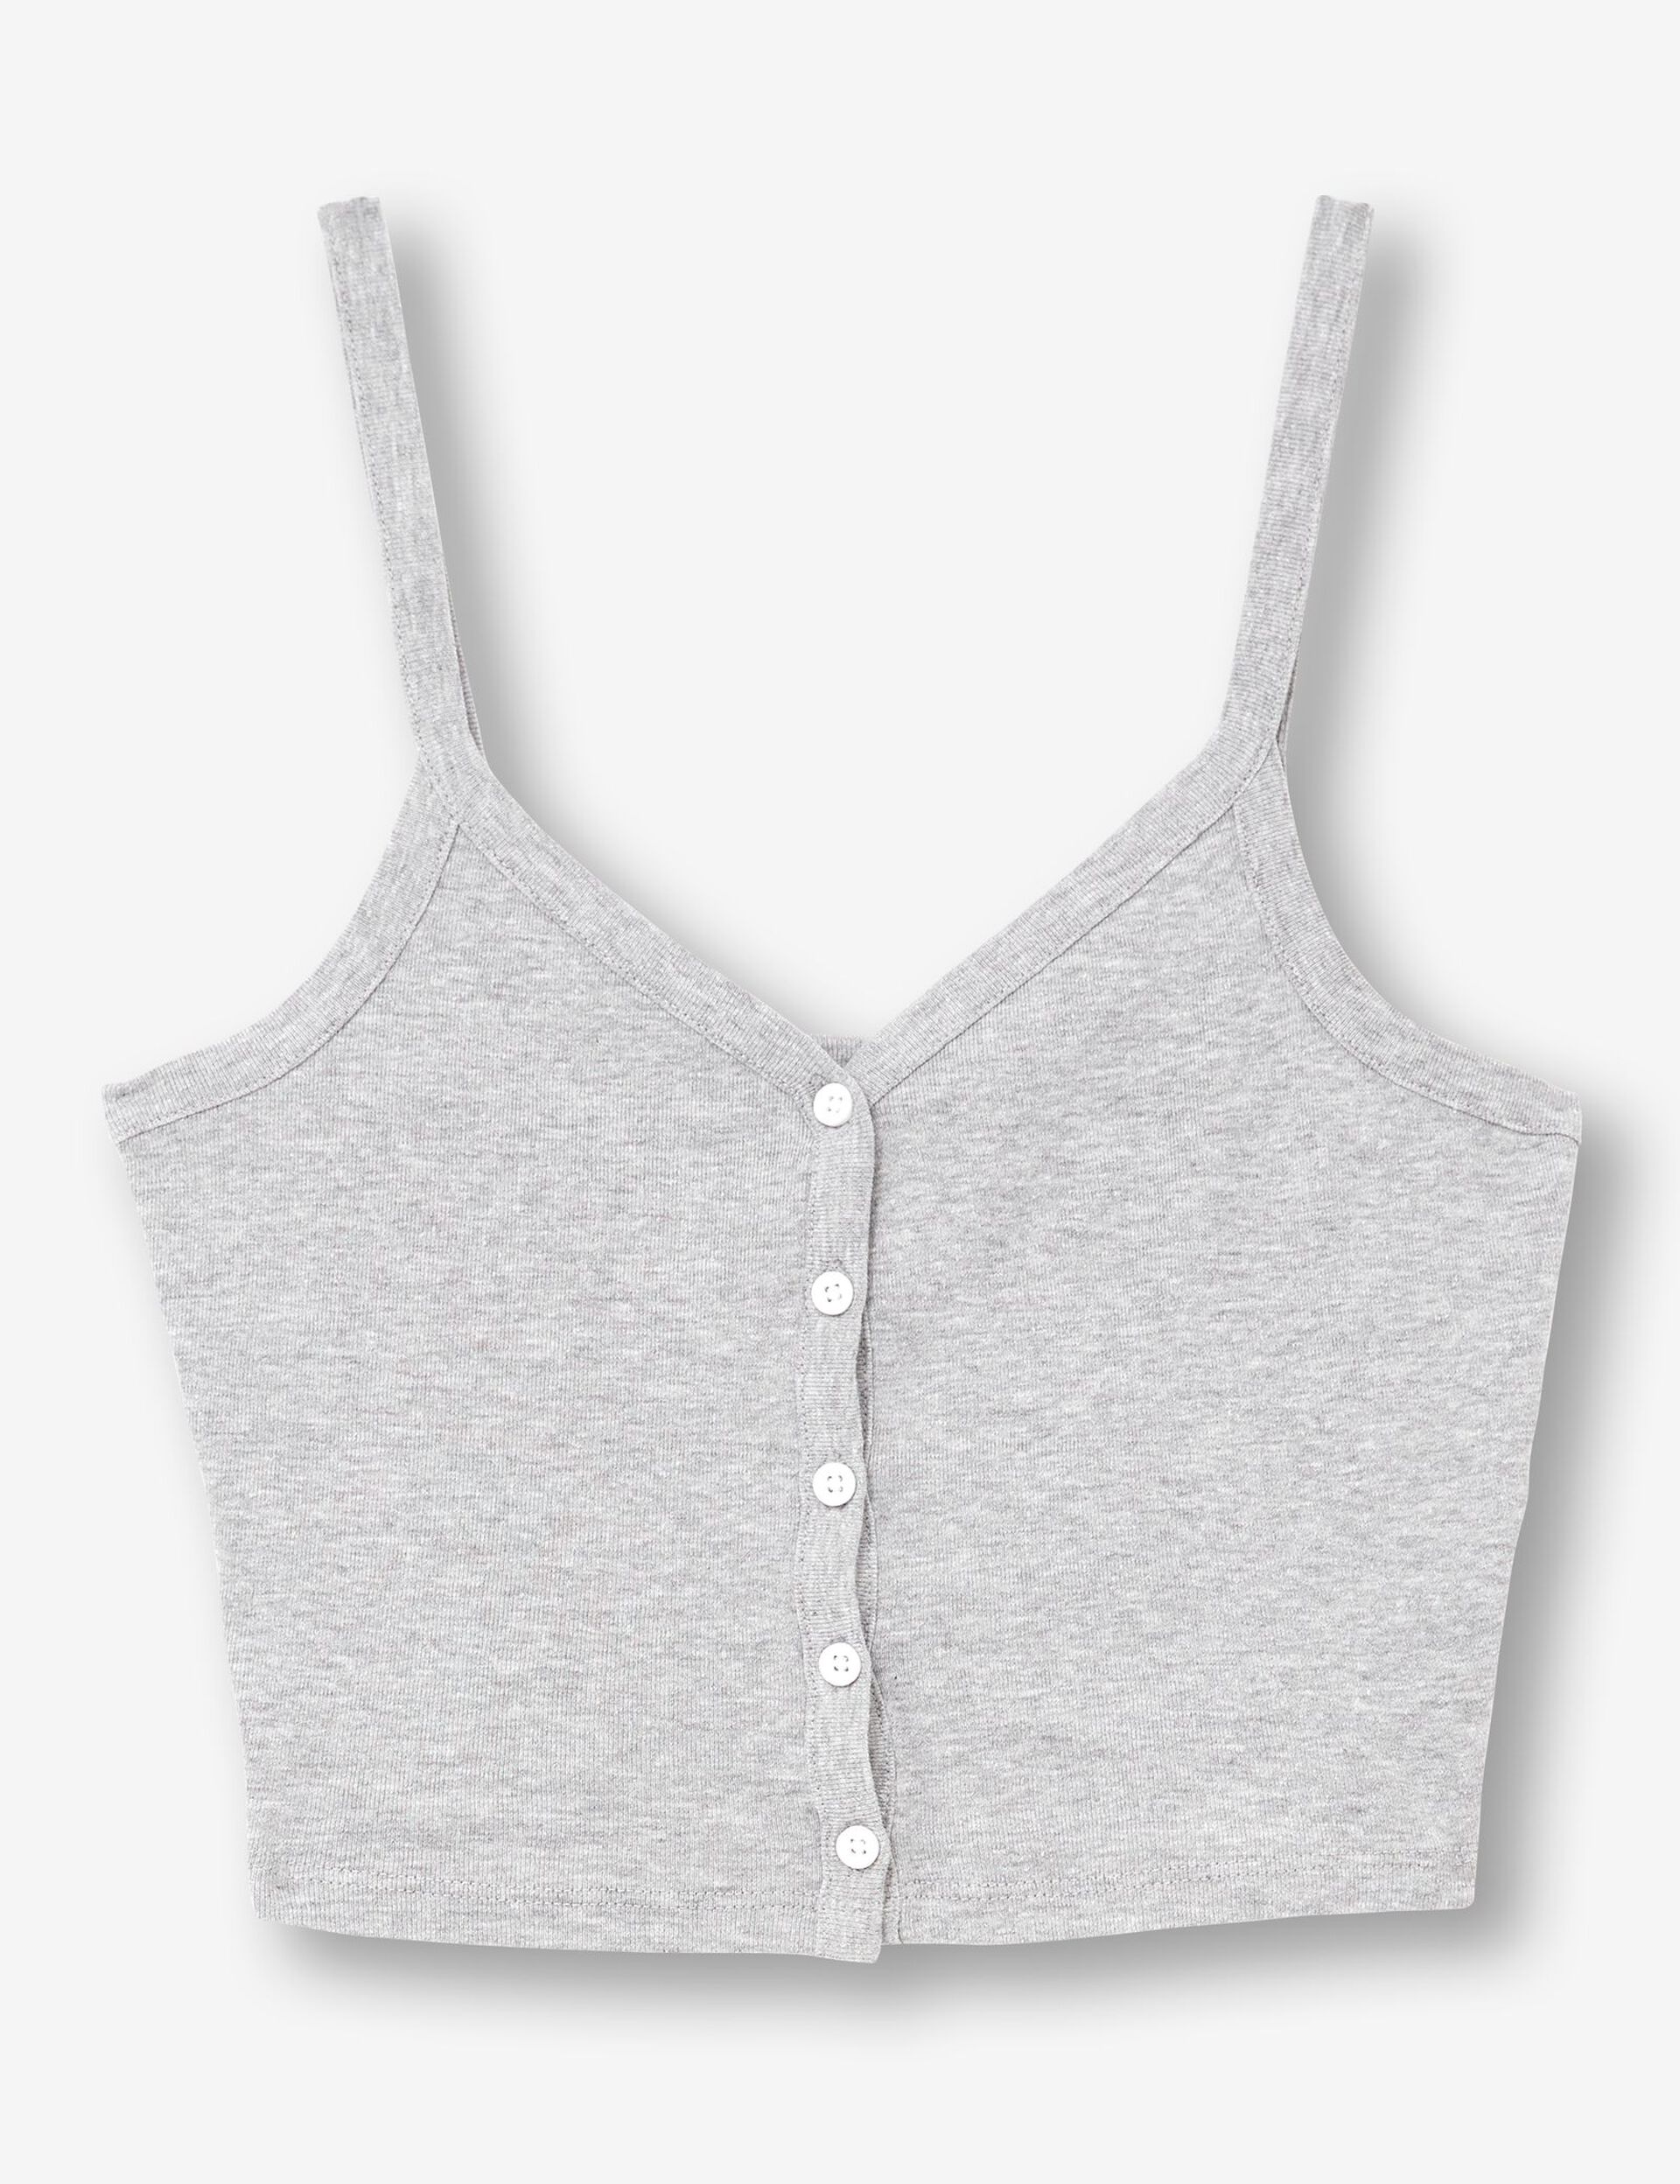 Vest top with buttons